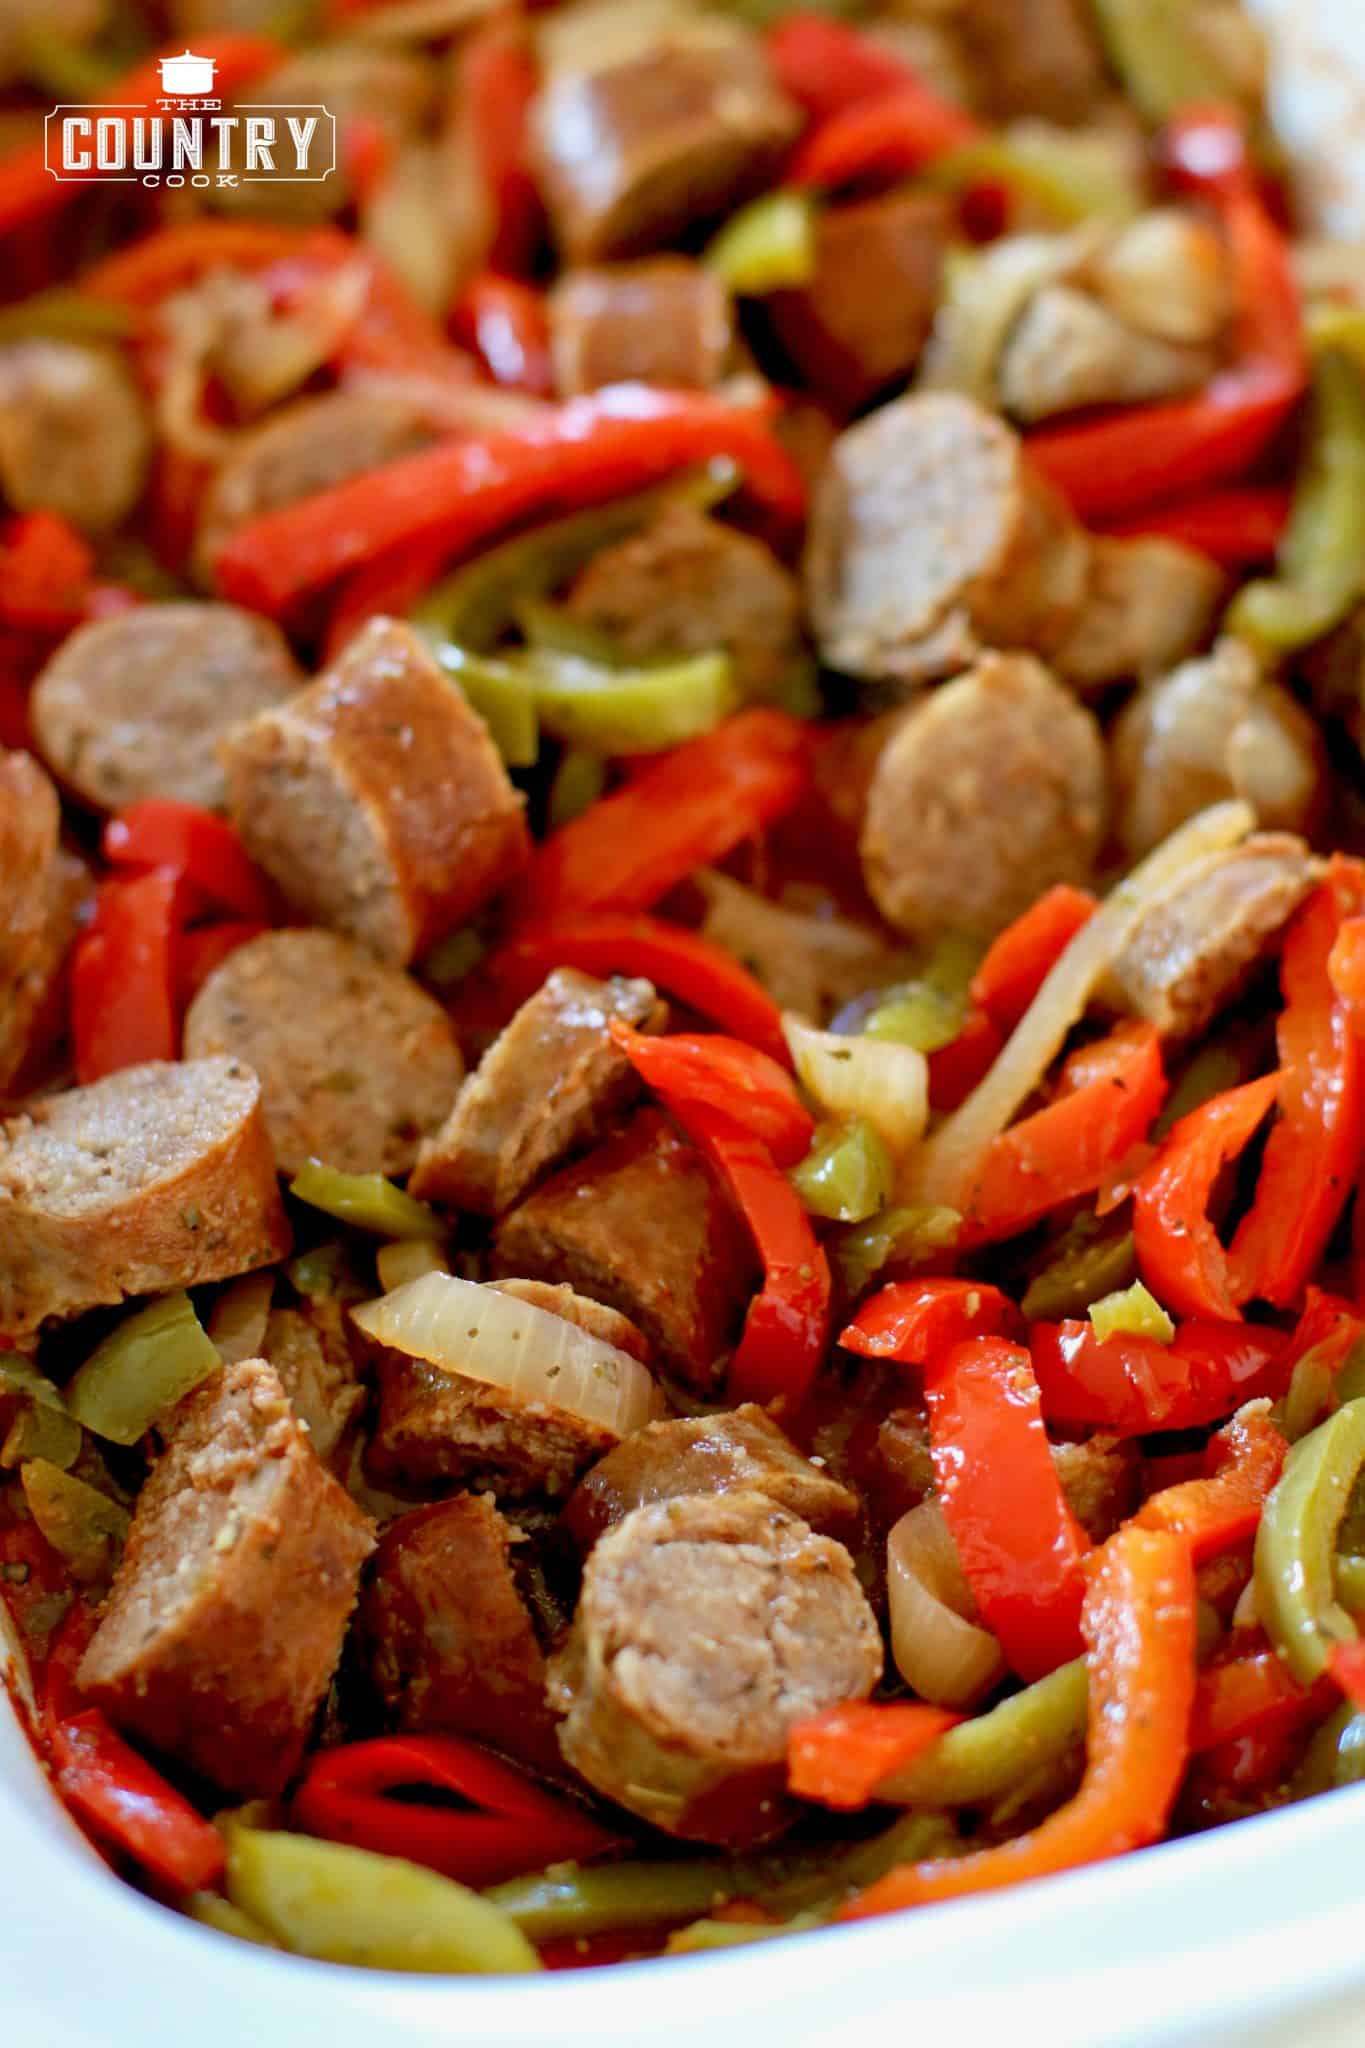 Sausage and peppers, slow cooker, sliced